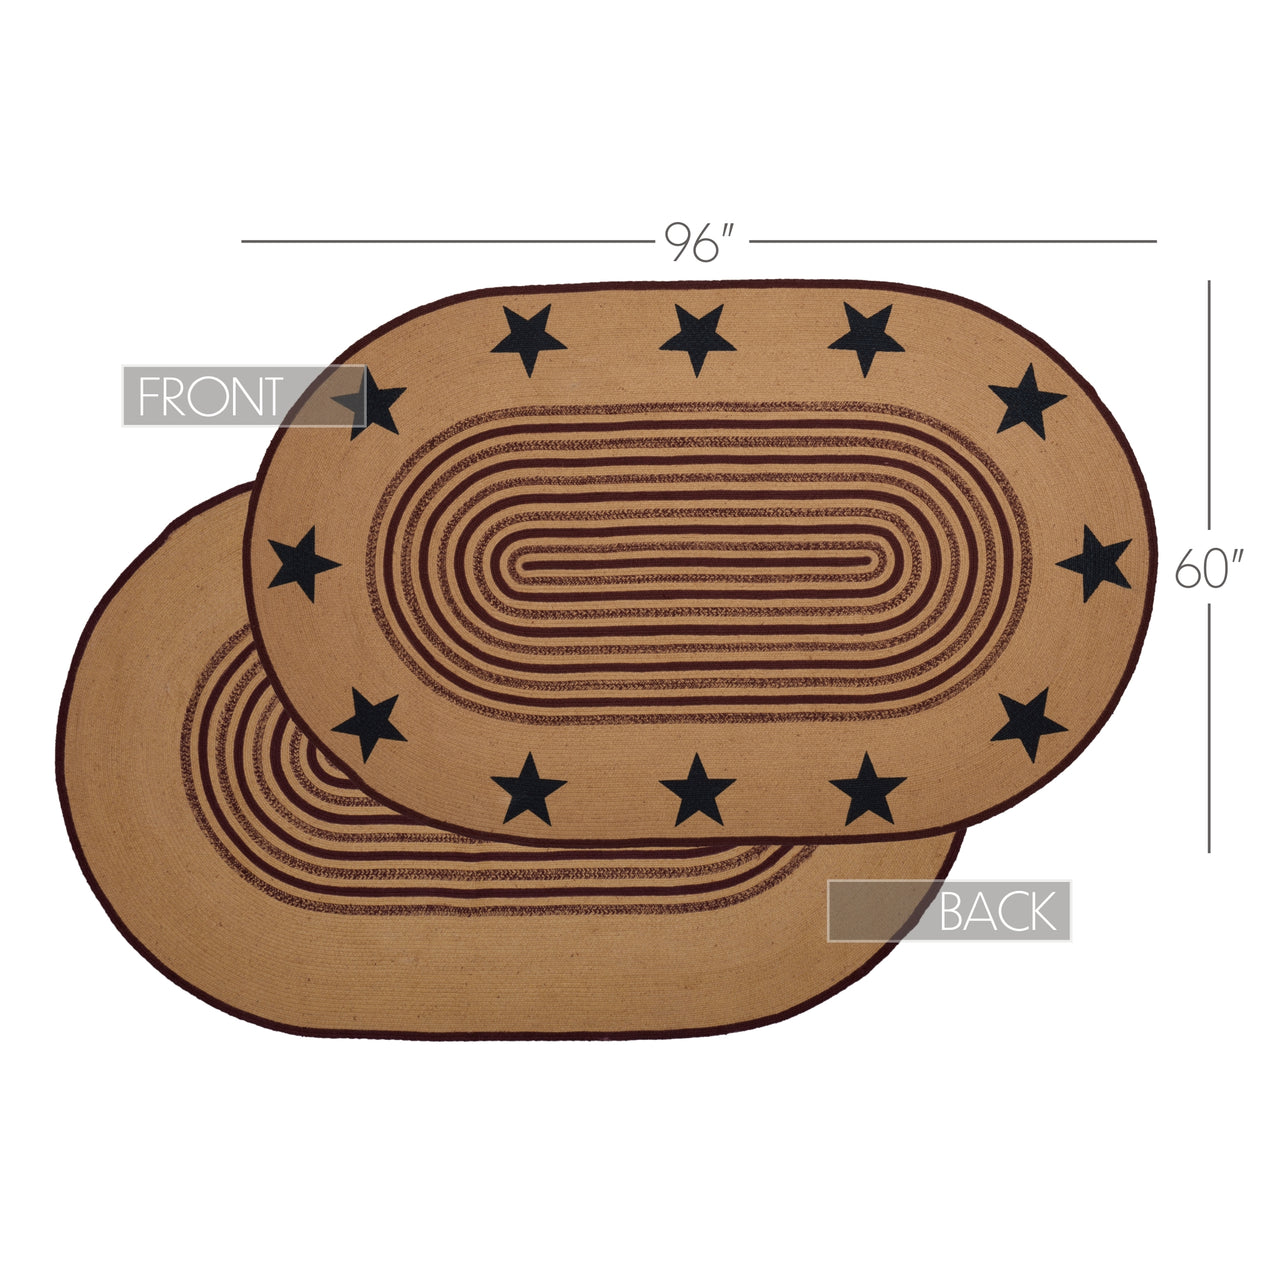 Potomac Jute Braided Rug Oval Stencil Stars 5'x8' with Rug Pad VHC Brands